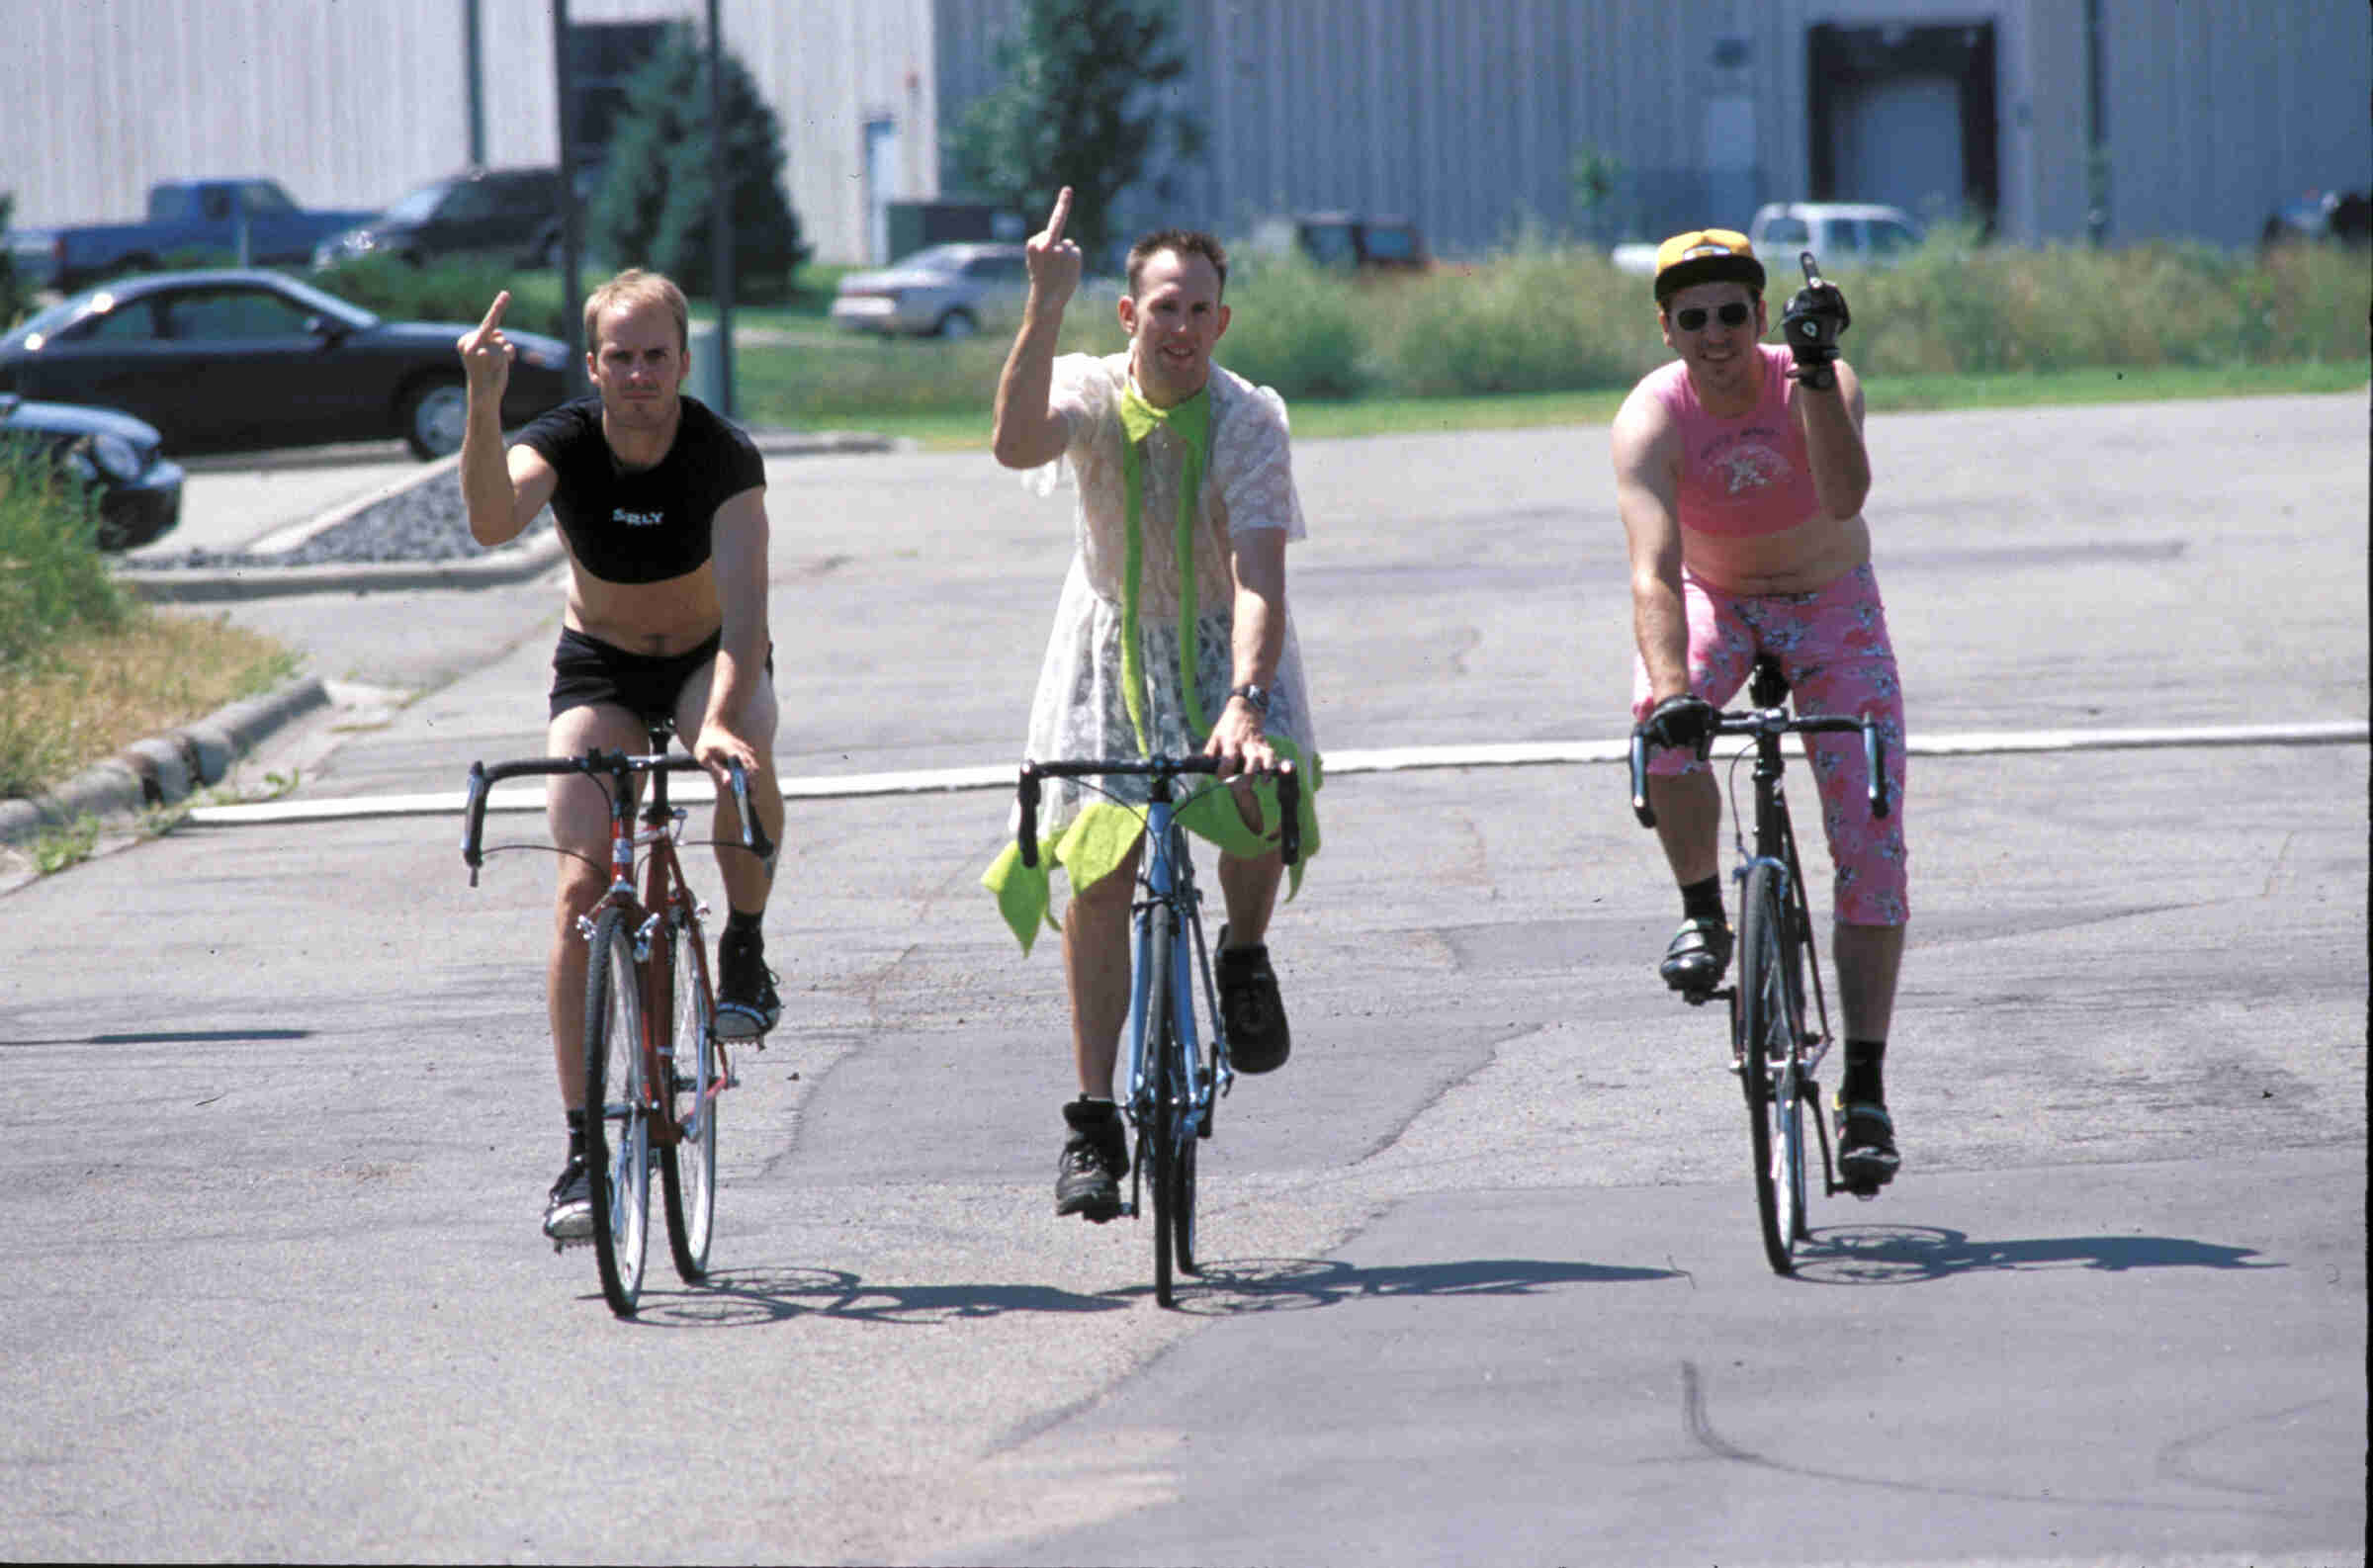 Front view of 3 cyclists wearing women's attire, holding up a middle finger as they ride their bikes on a paved street